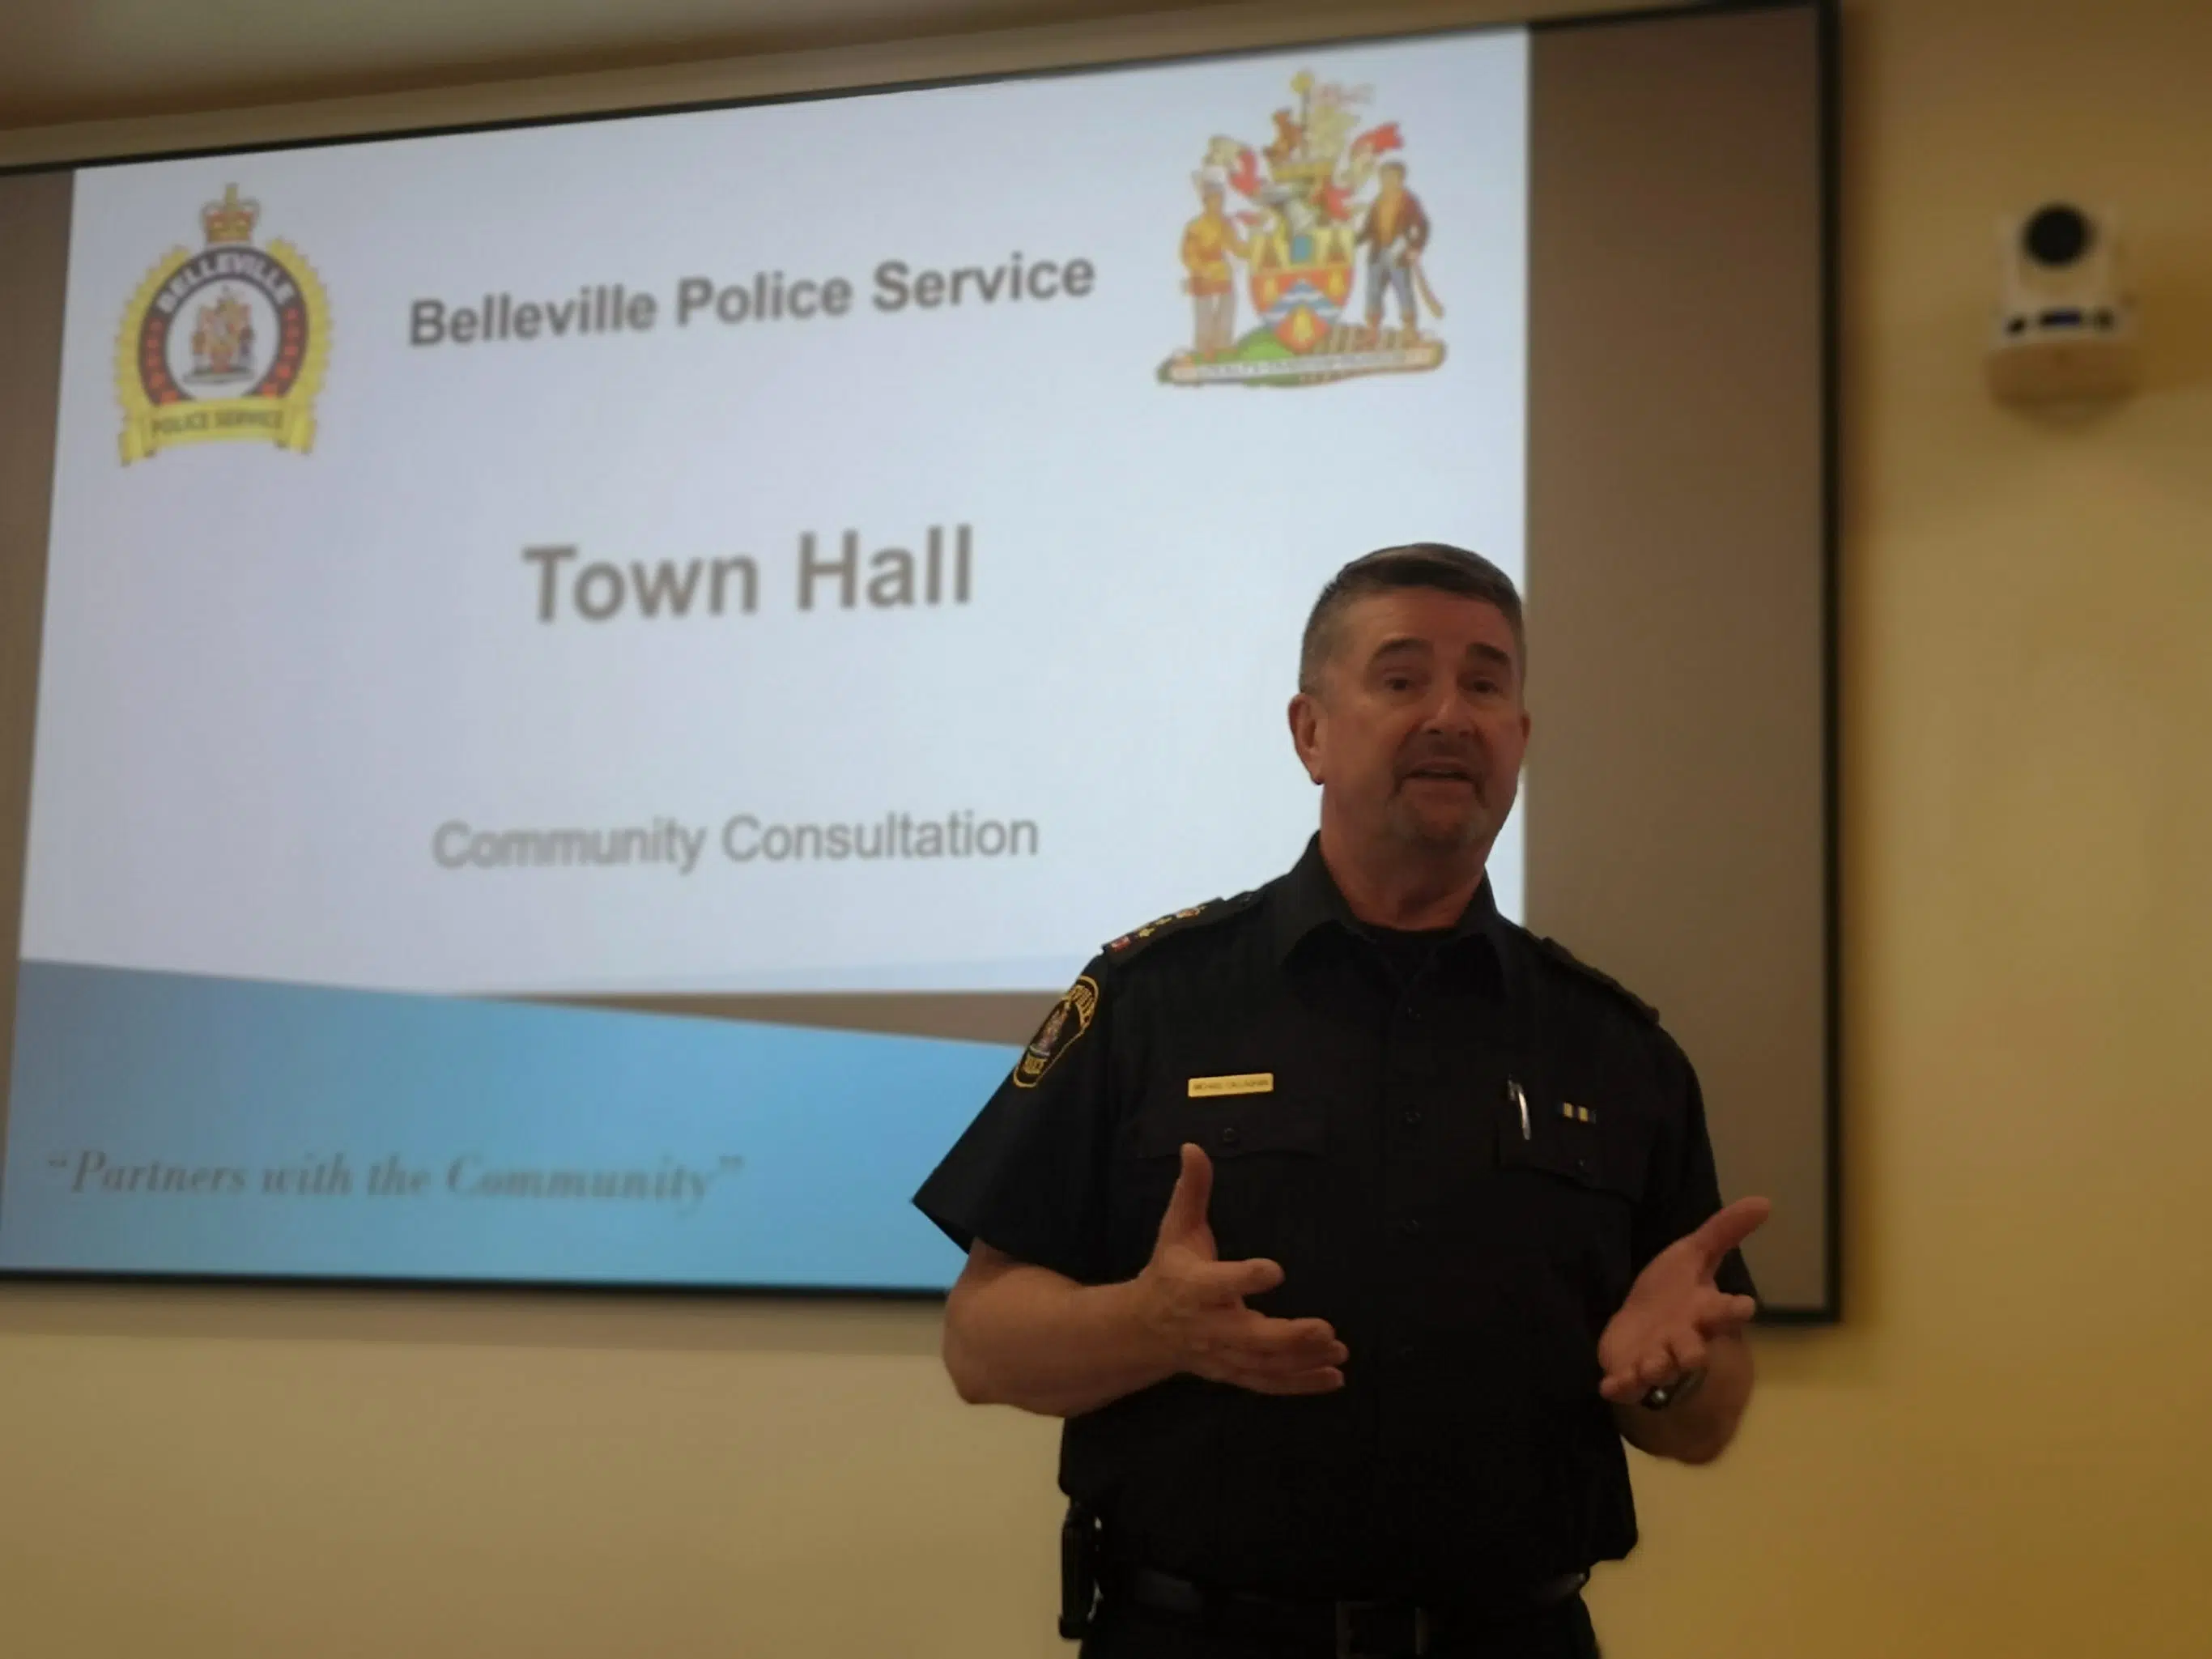 Belleville Police Chief pushes for detox facility to help homeless